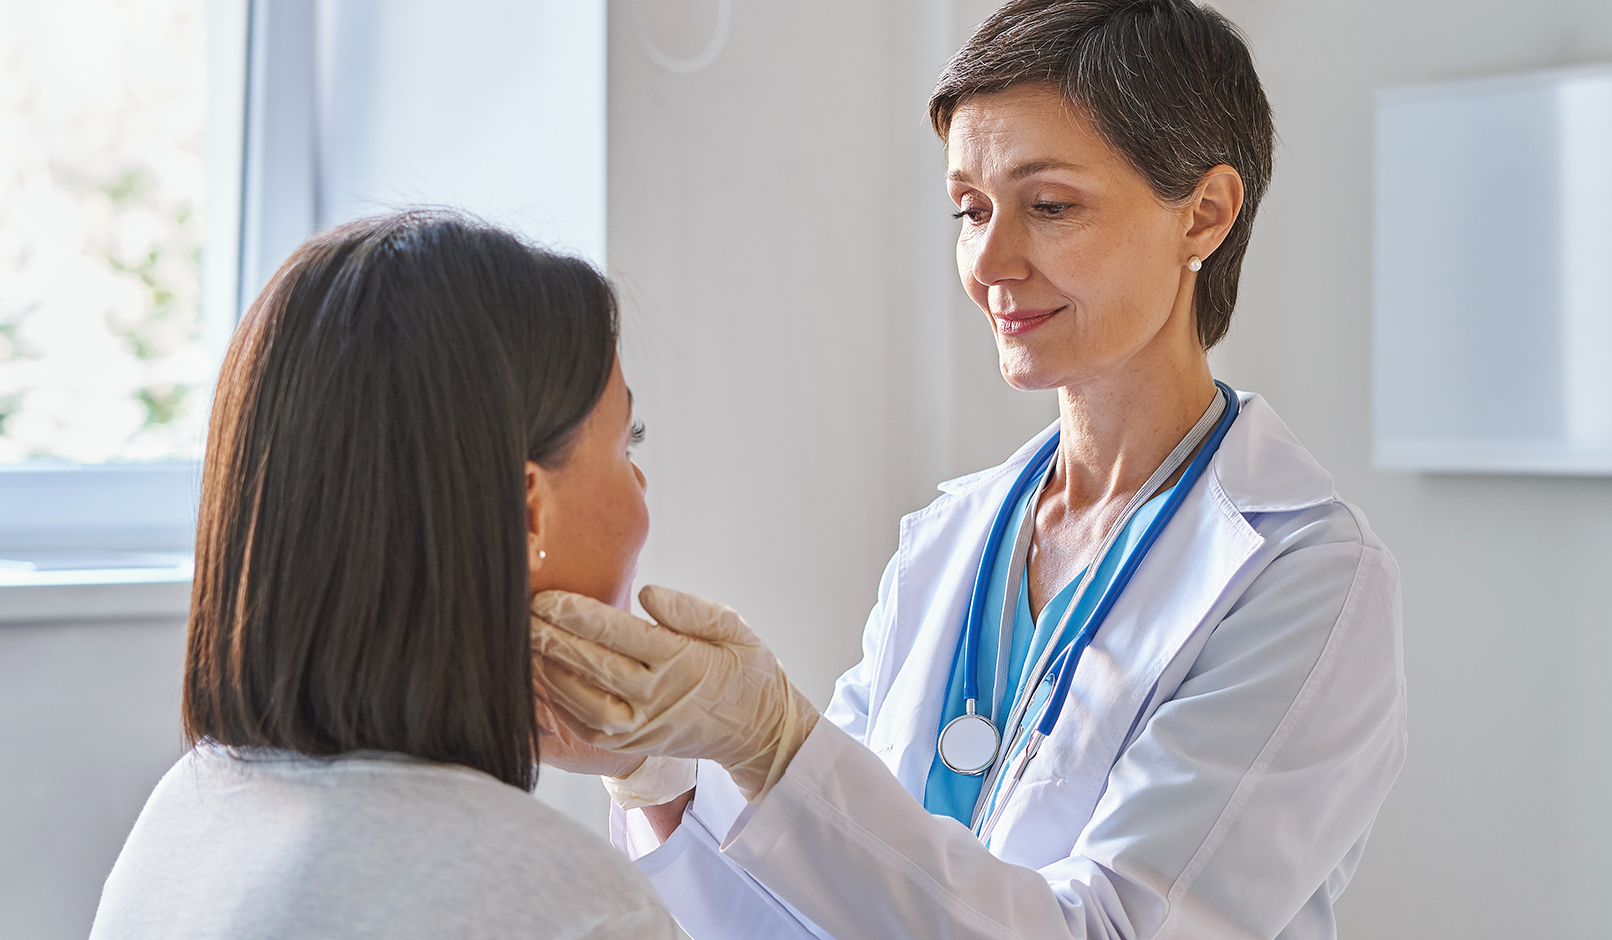 A physician gently feels a patient’s neck to check the thyroid.